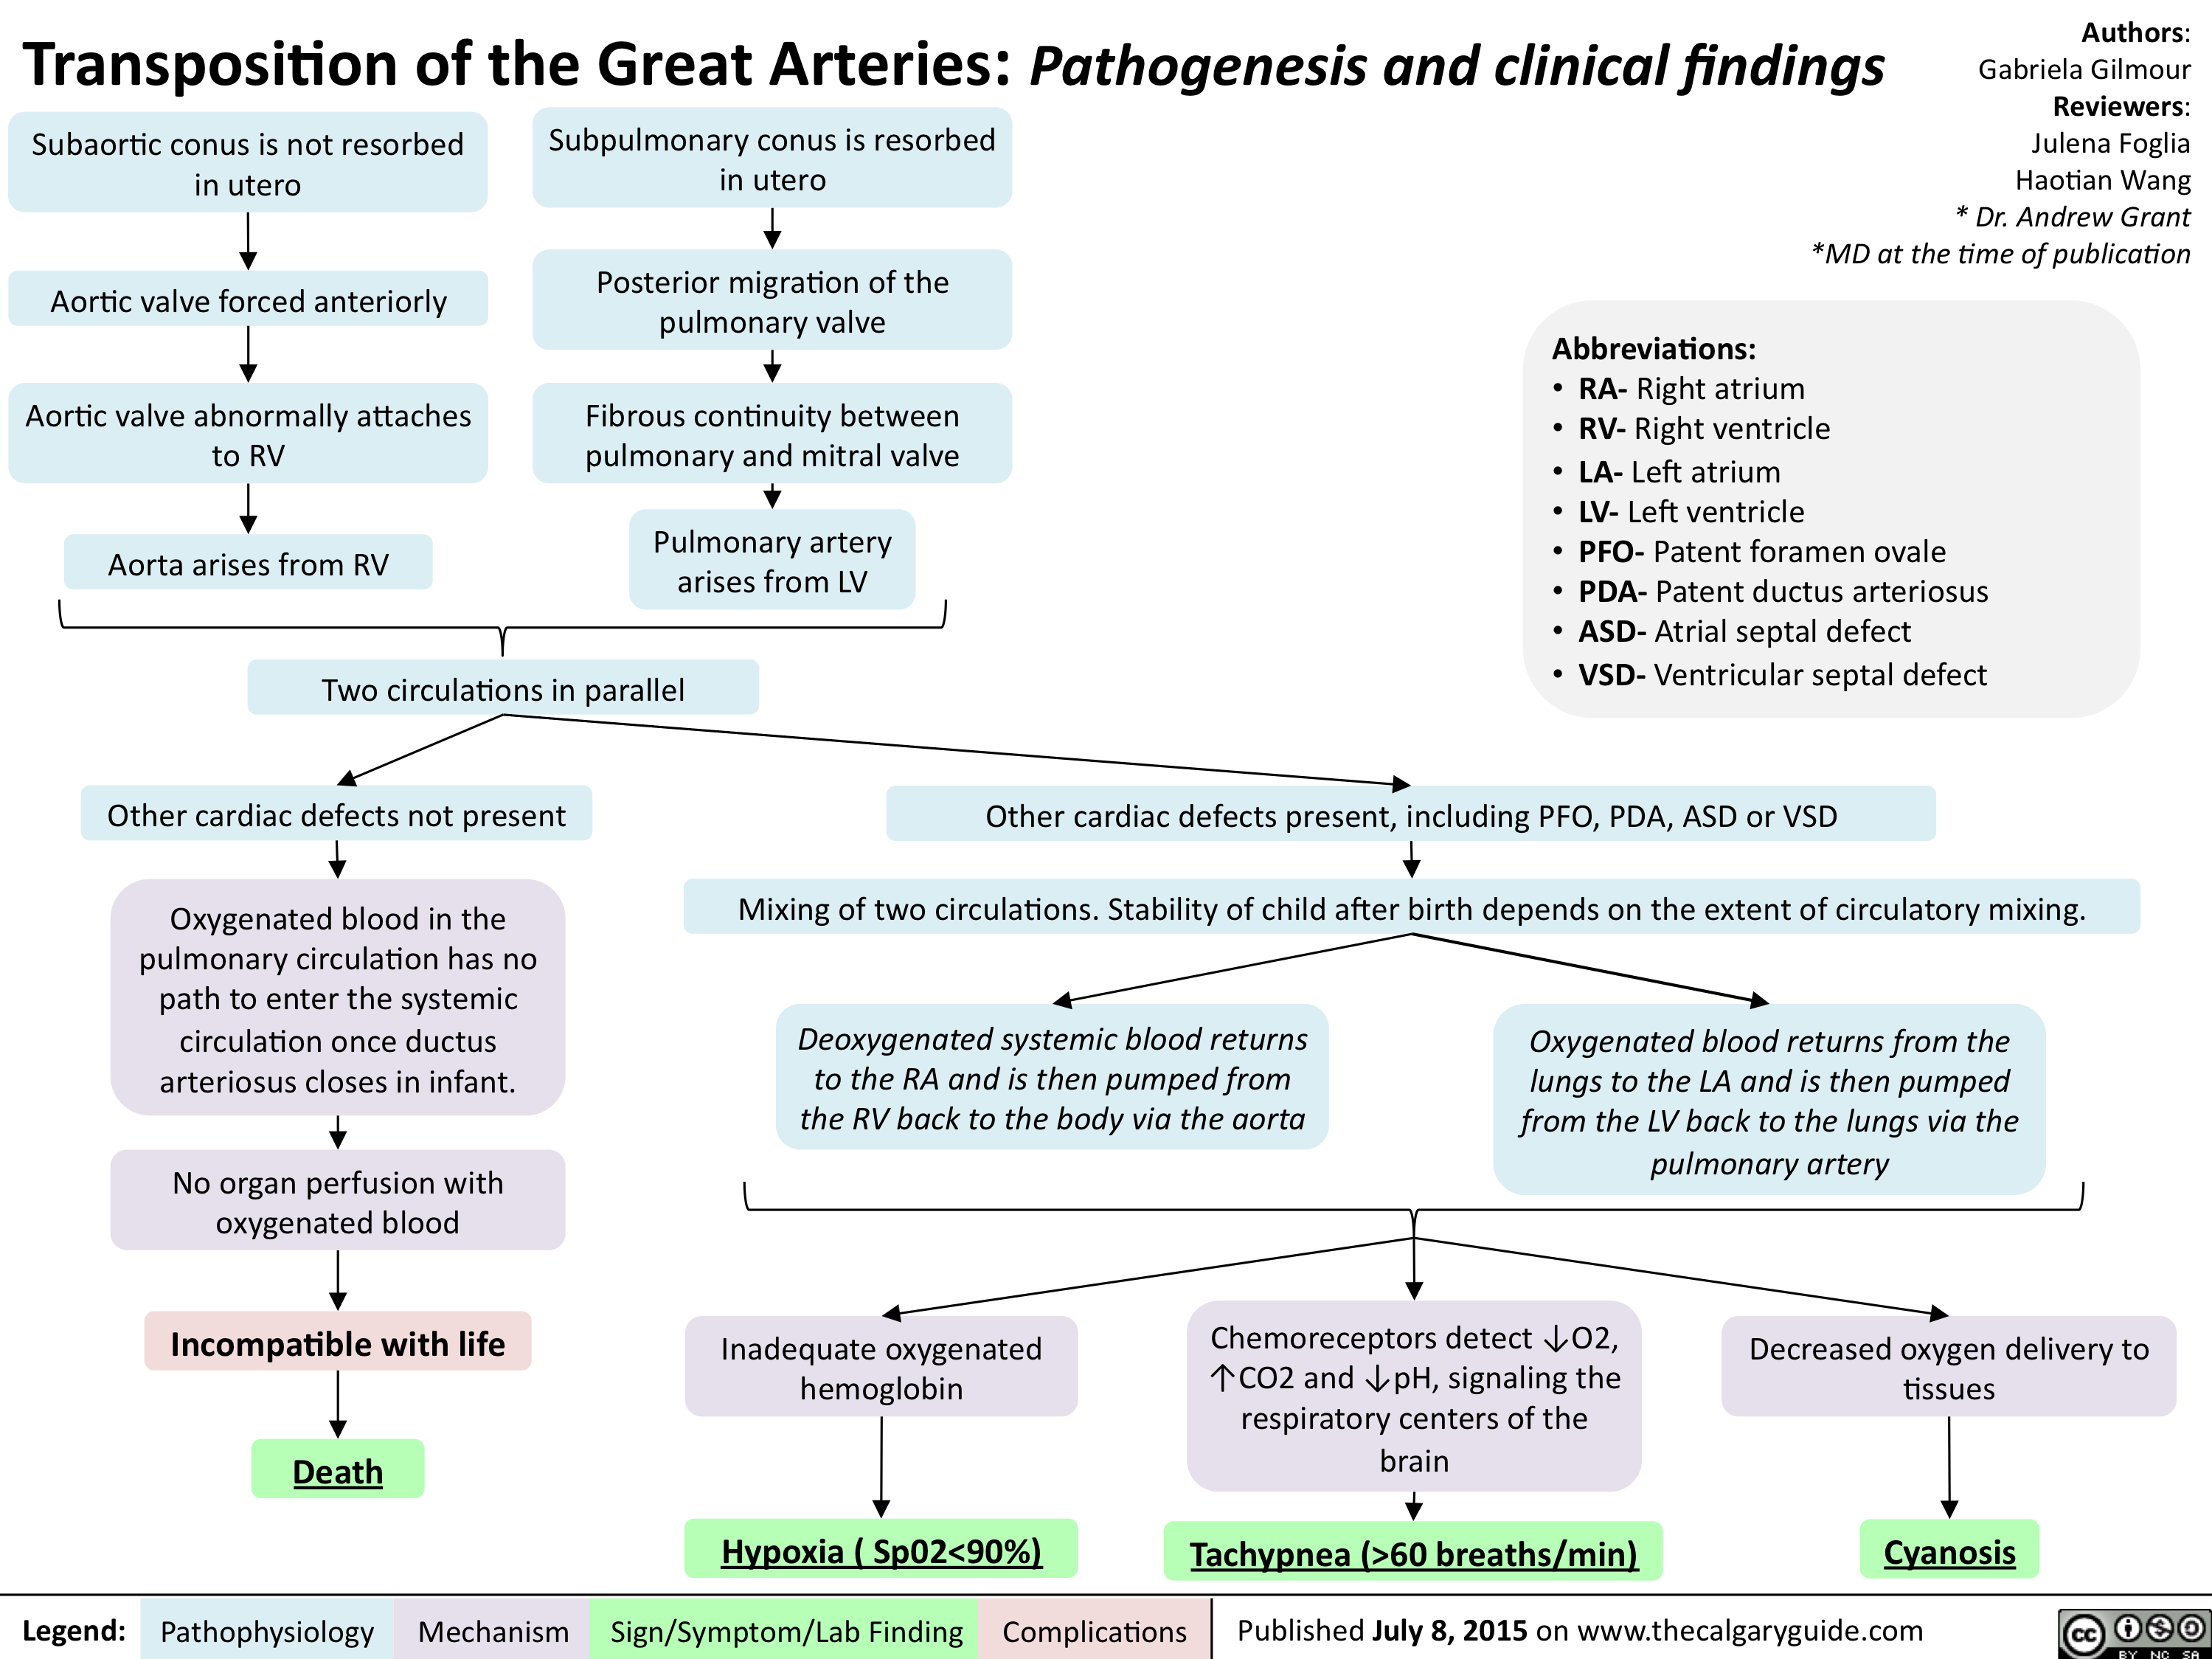 Transposition of the Great Arteries-Pathogenesis & clinical findings